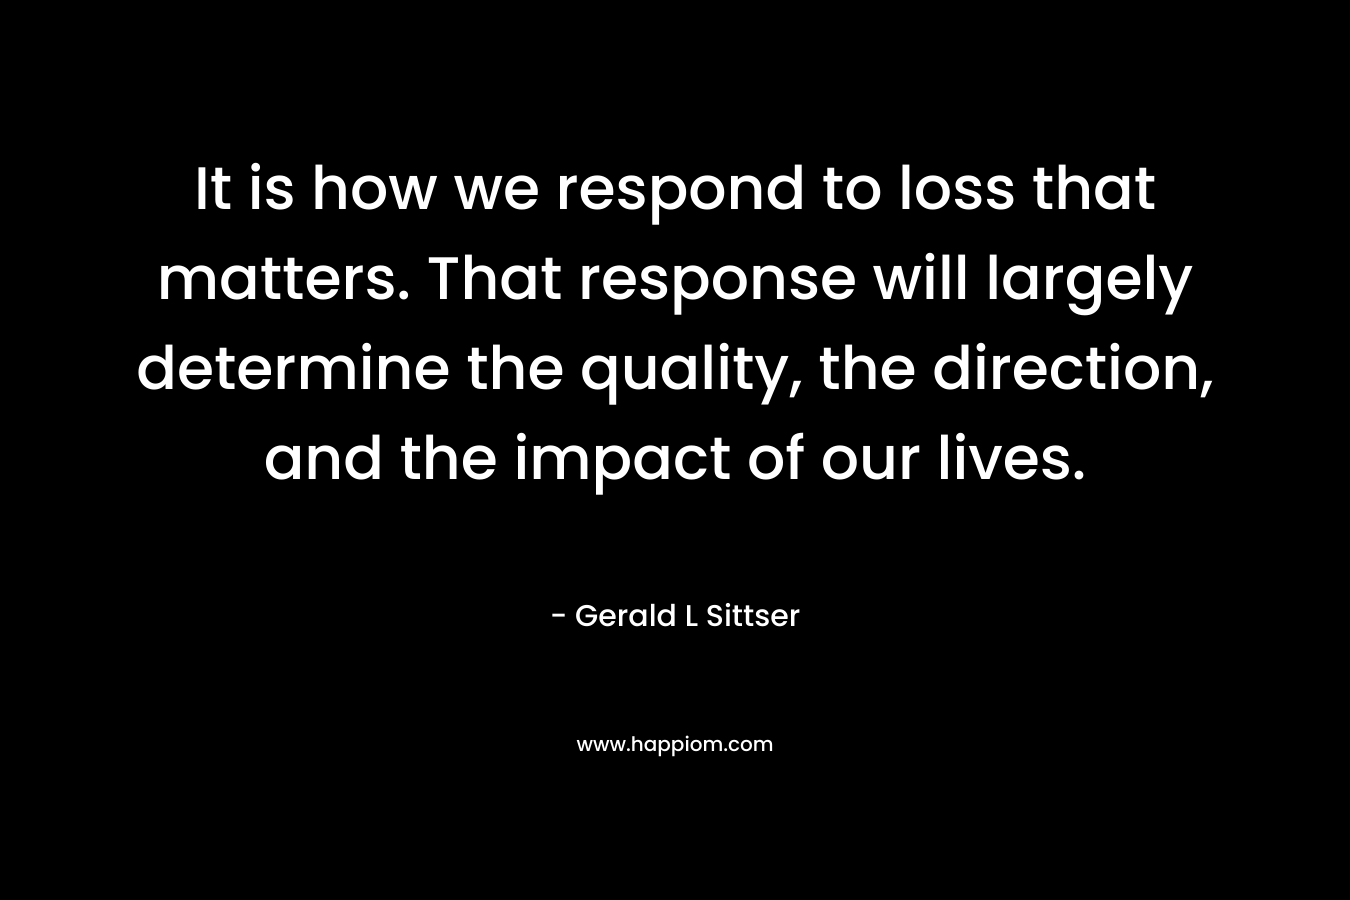 It is how we respond to loss that matters. That response will largely determine the quality, the direction, and the impact of our lives. – Gerald L Sittser